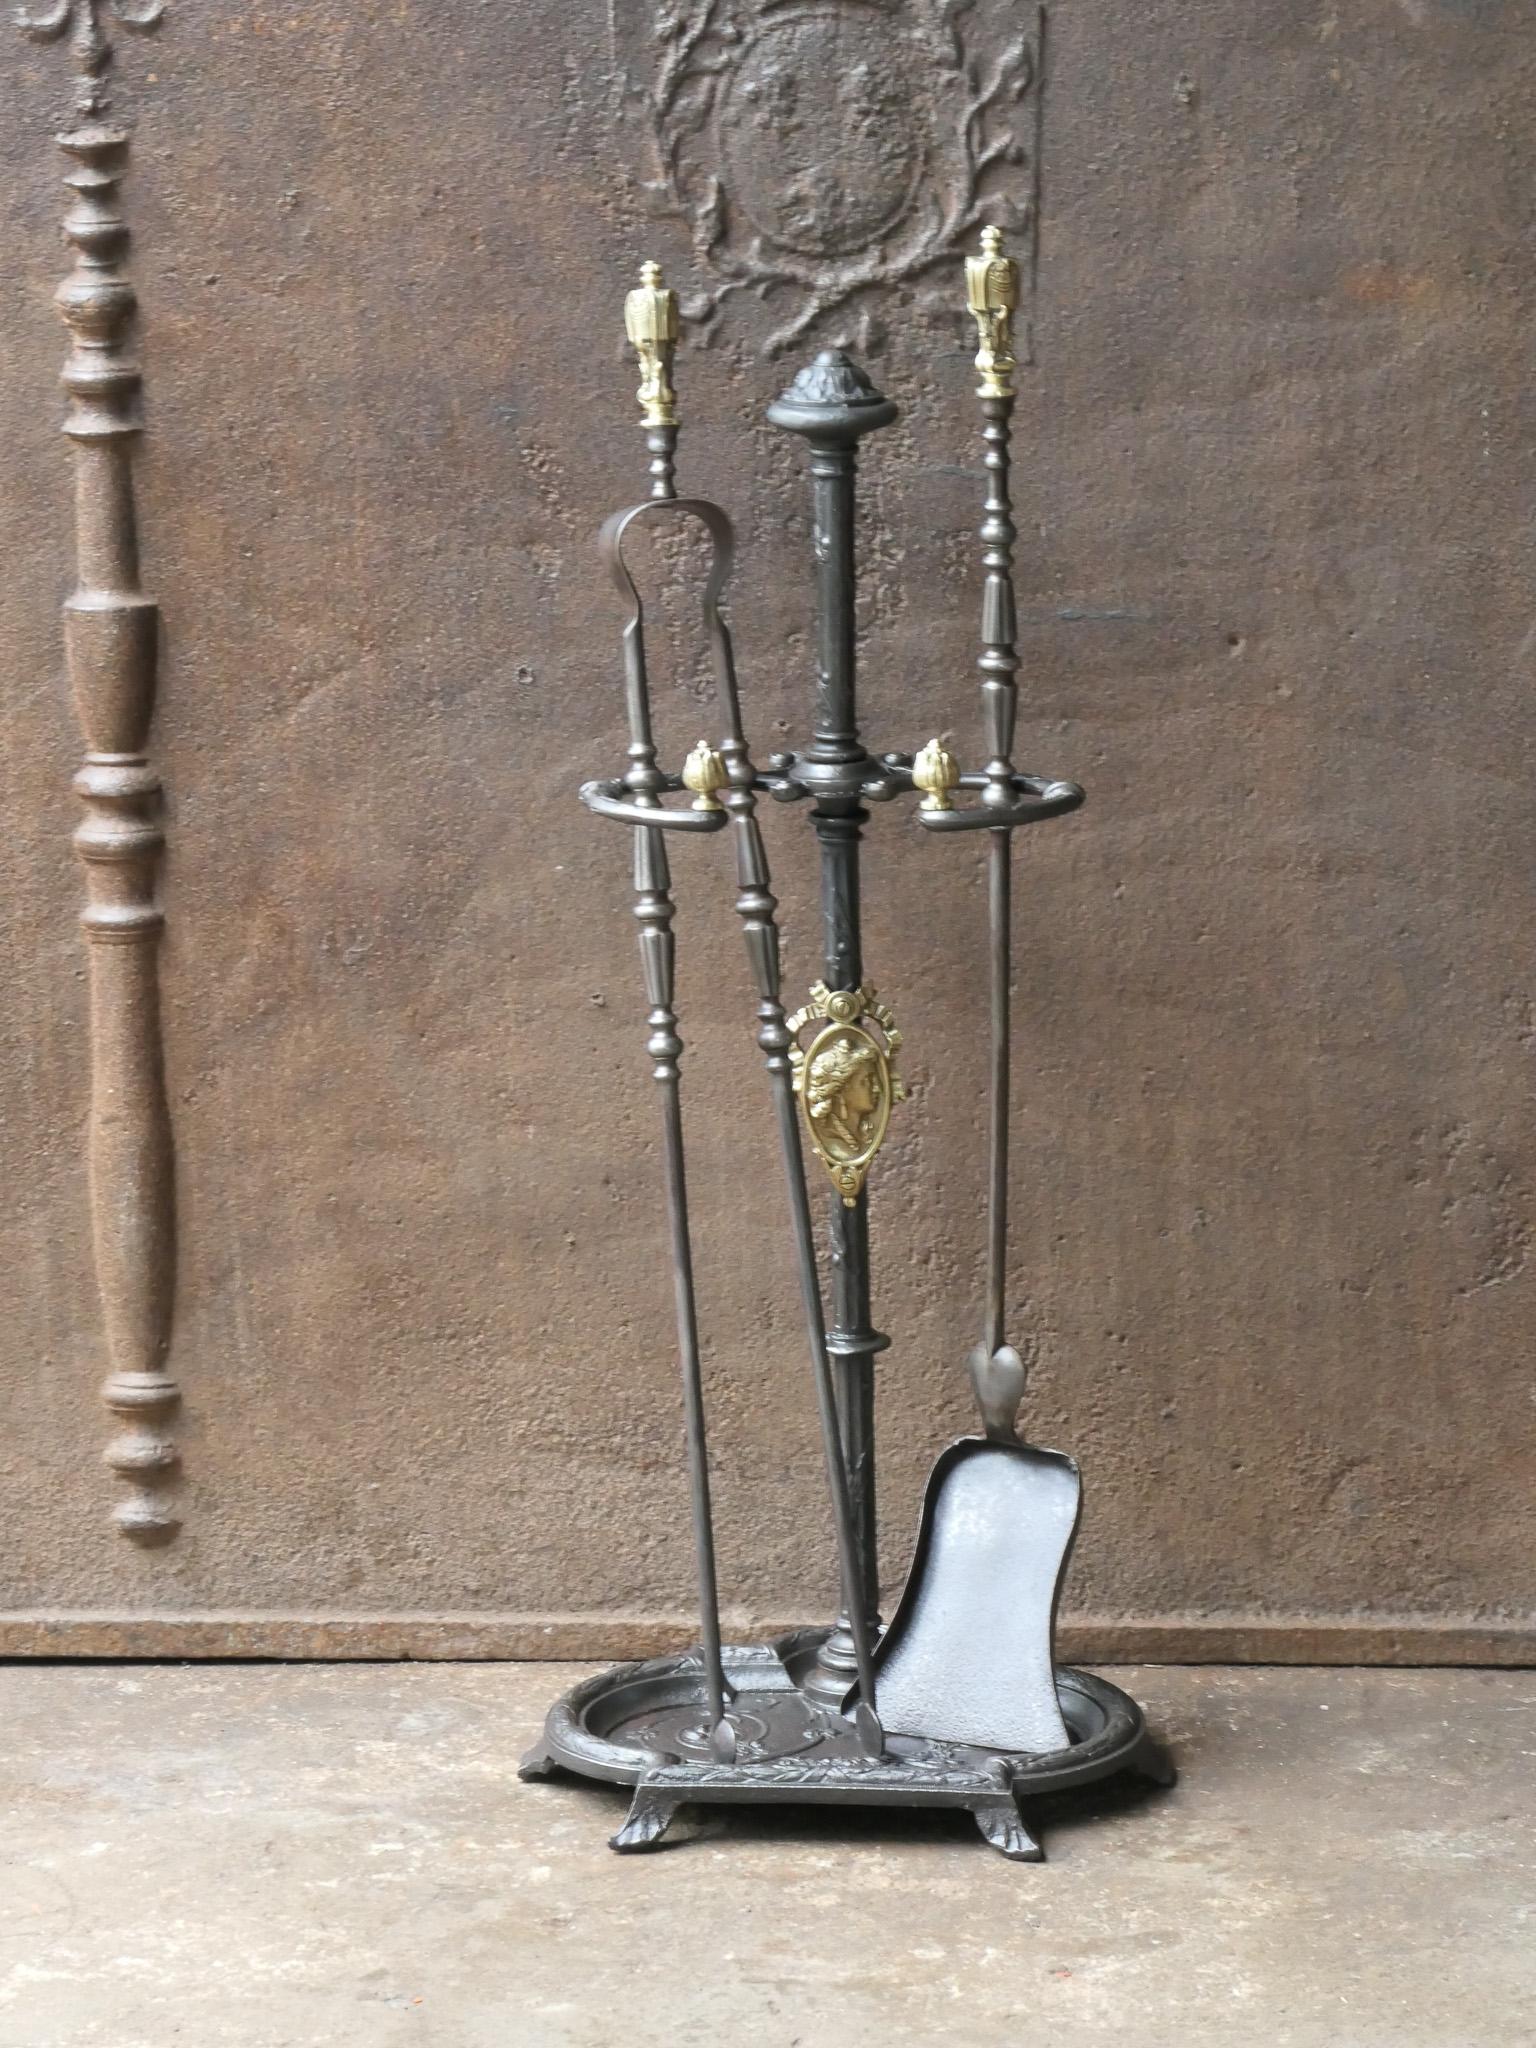 19th century French fireplace tool set. Napoleon III period. The tool set consists of tongs, shovel, and a stand. The tools are made of wrought iron with brass handles and the stand of cast iron also with brass details. The set is in a good